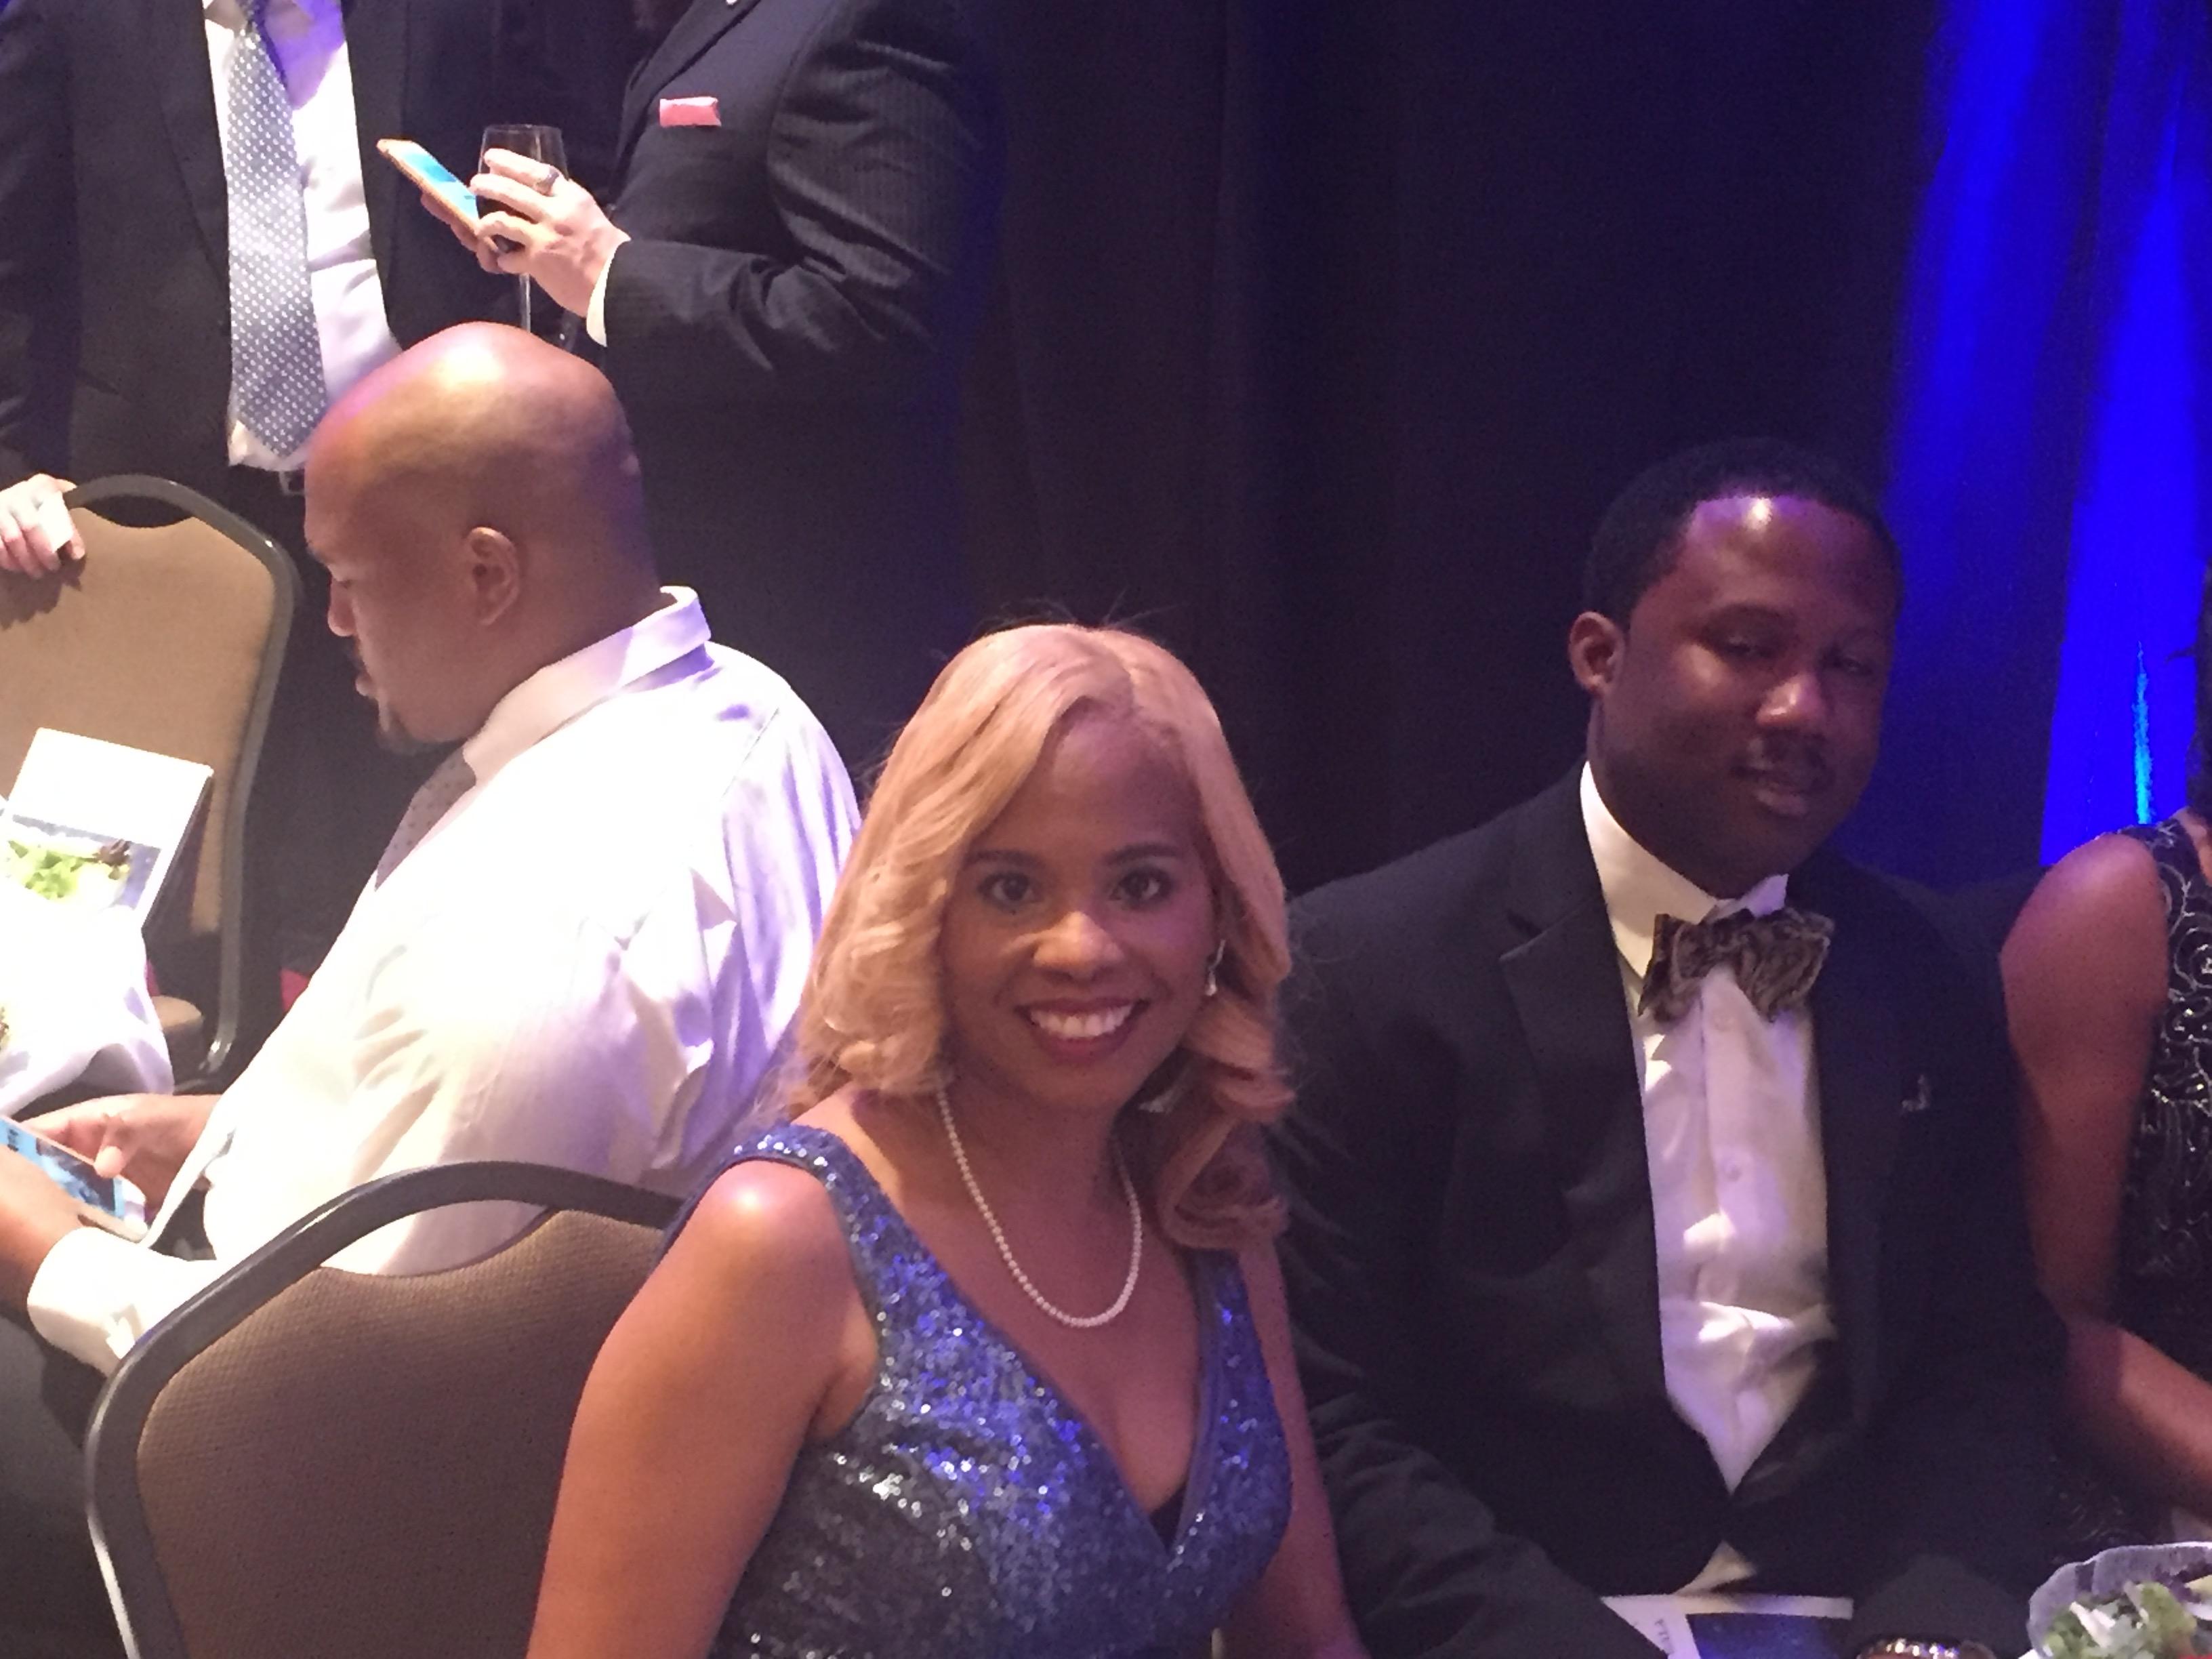 Photo of Principal Penn sitting next to her brother-in-law at the gala honoring educators from across the state